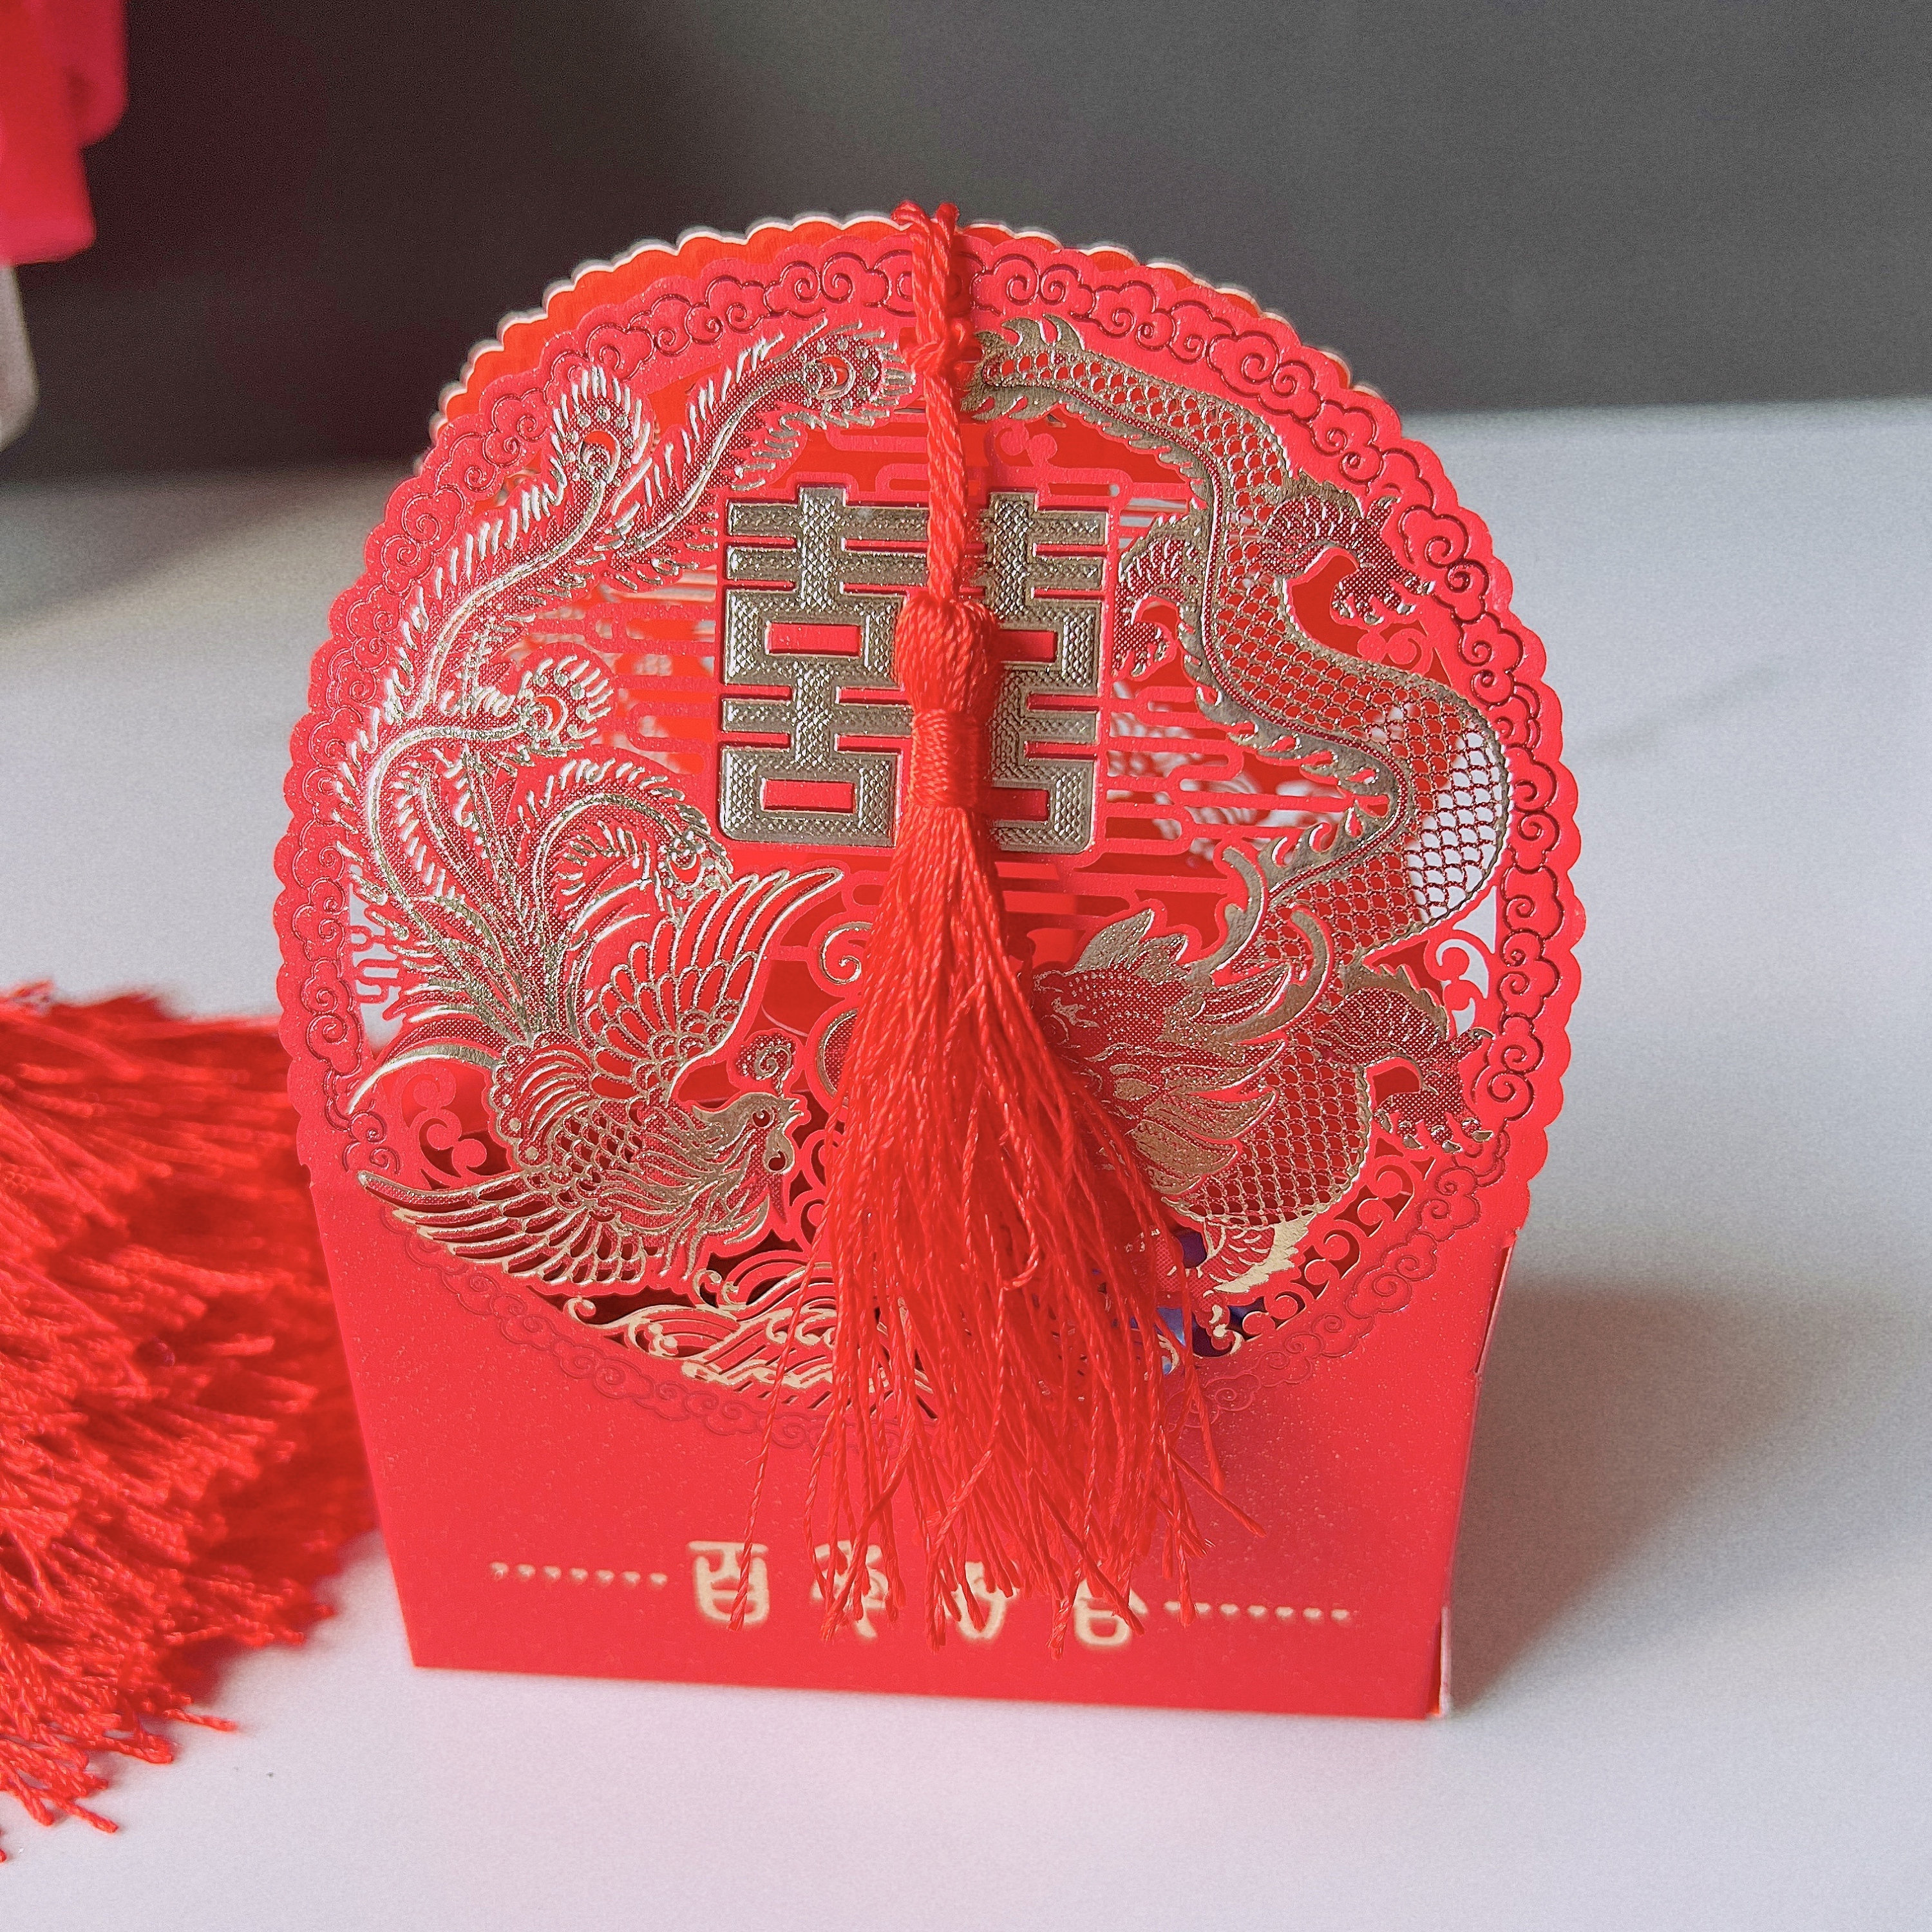 Yyeselk Red Striped Candy Box European Style Wedding Gift Packaging Flower  Vase Shaped Paper Box Christmas Candy Box 